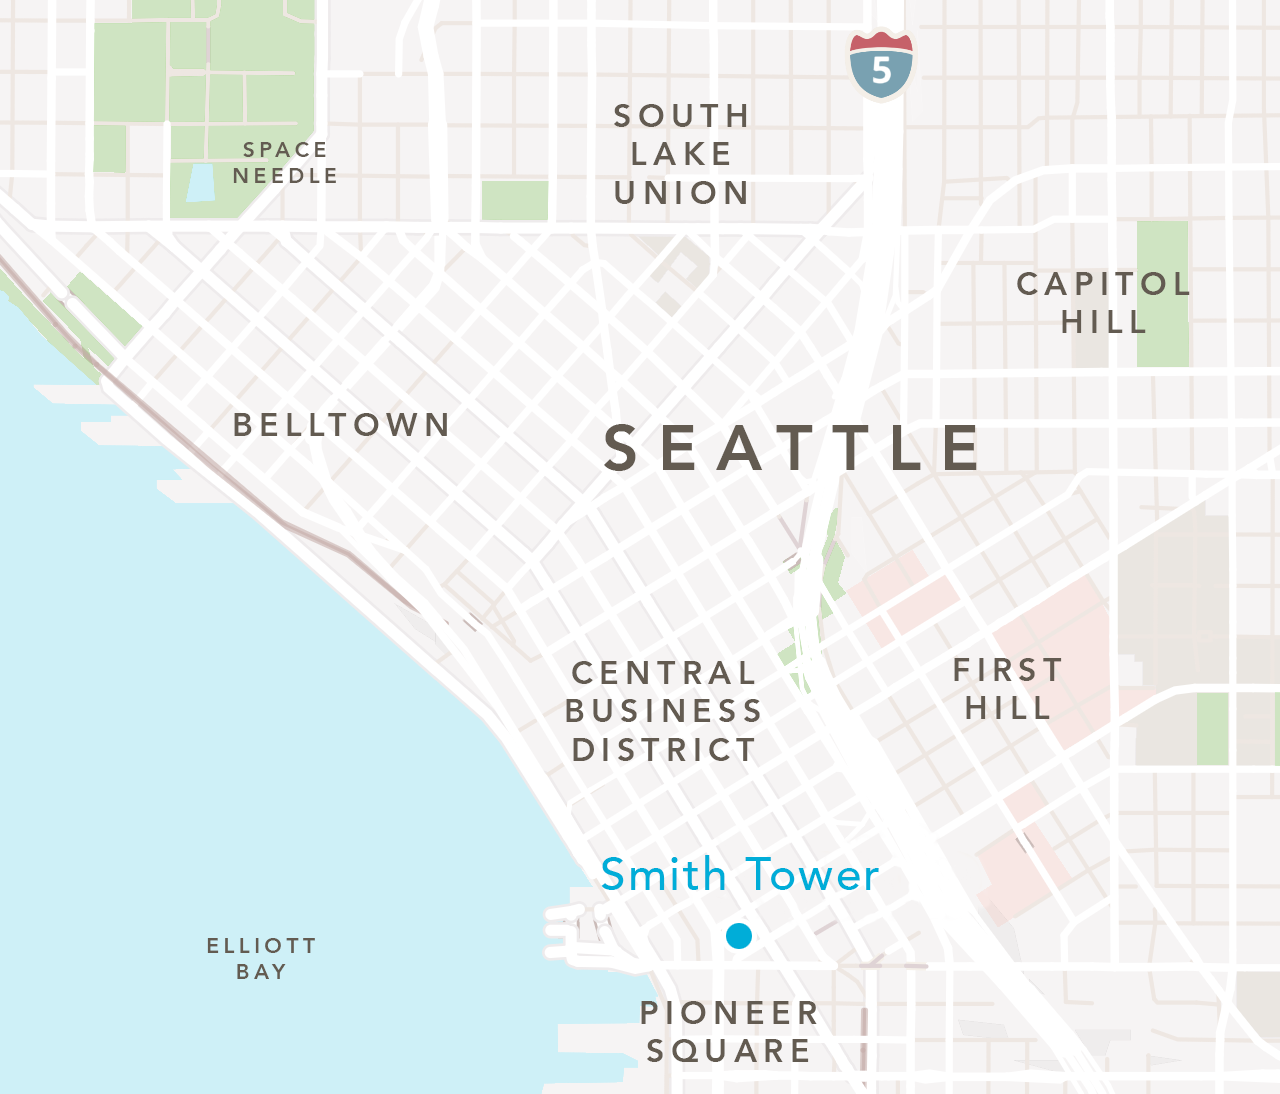 Map of downtown Seattle that shows the neighborhoods around Smith Tower.